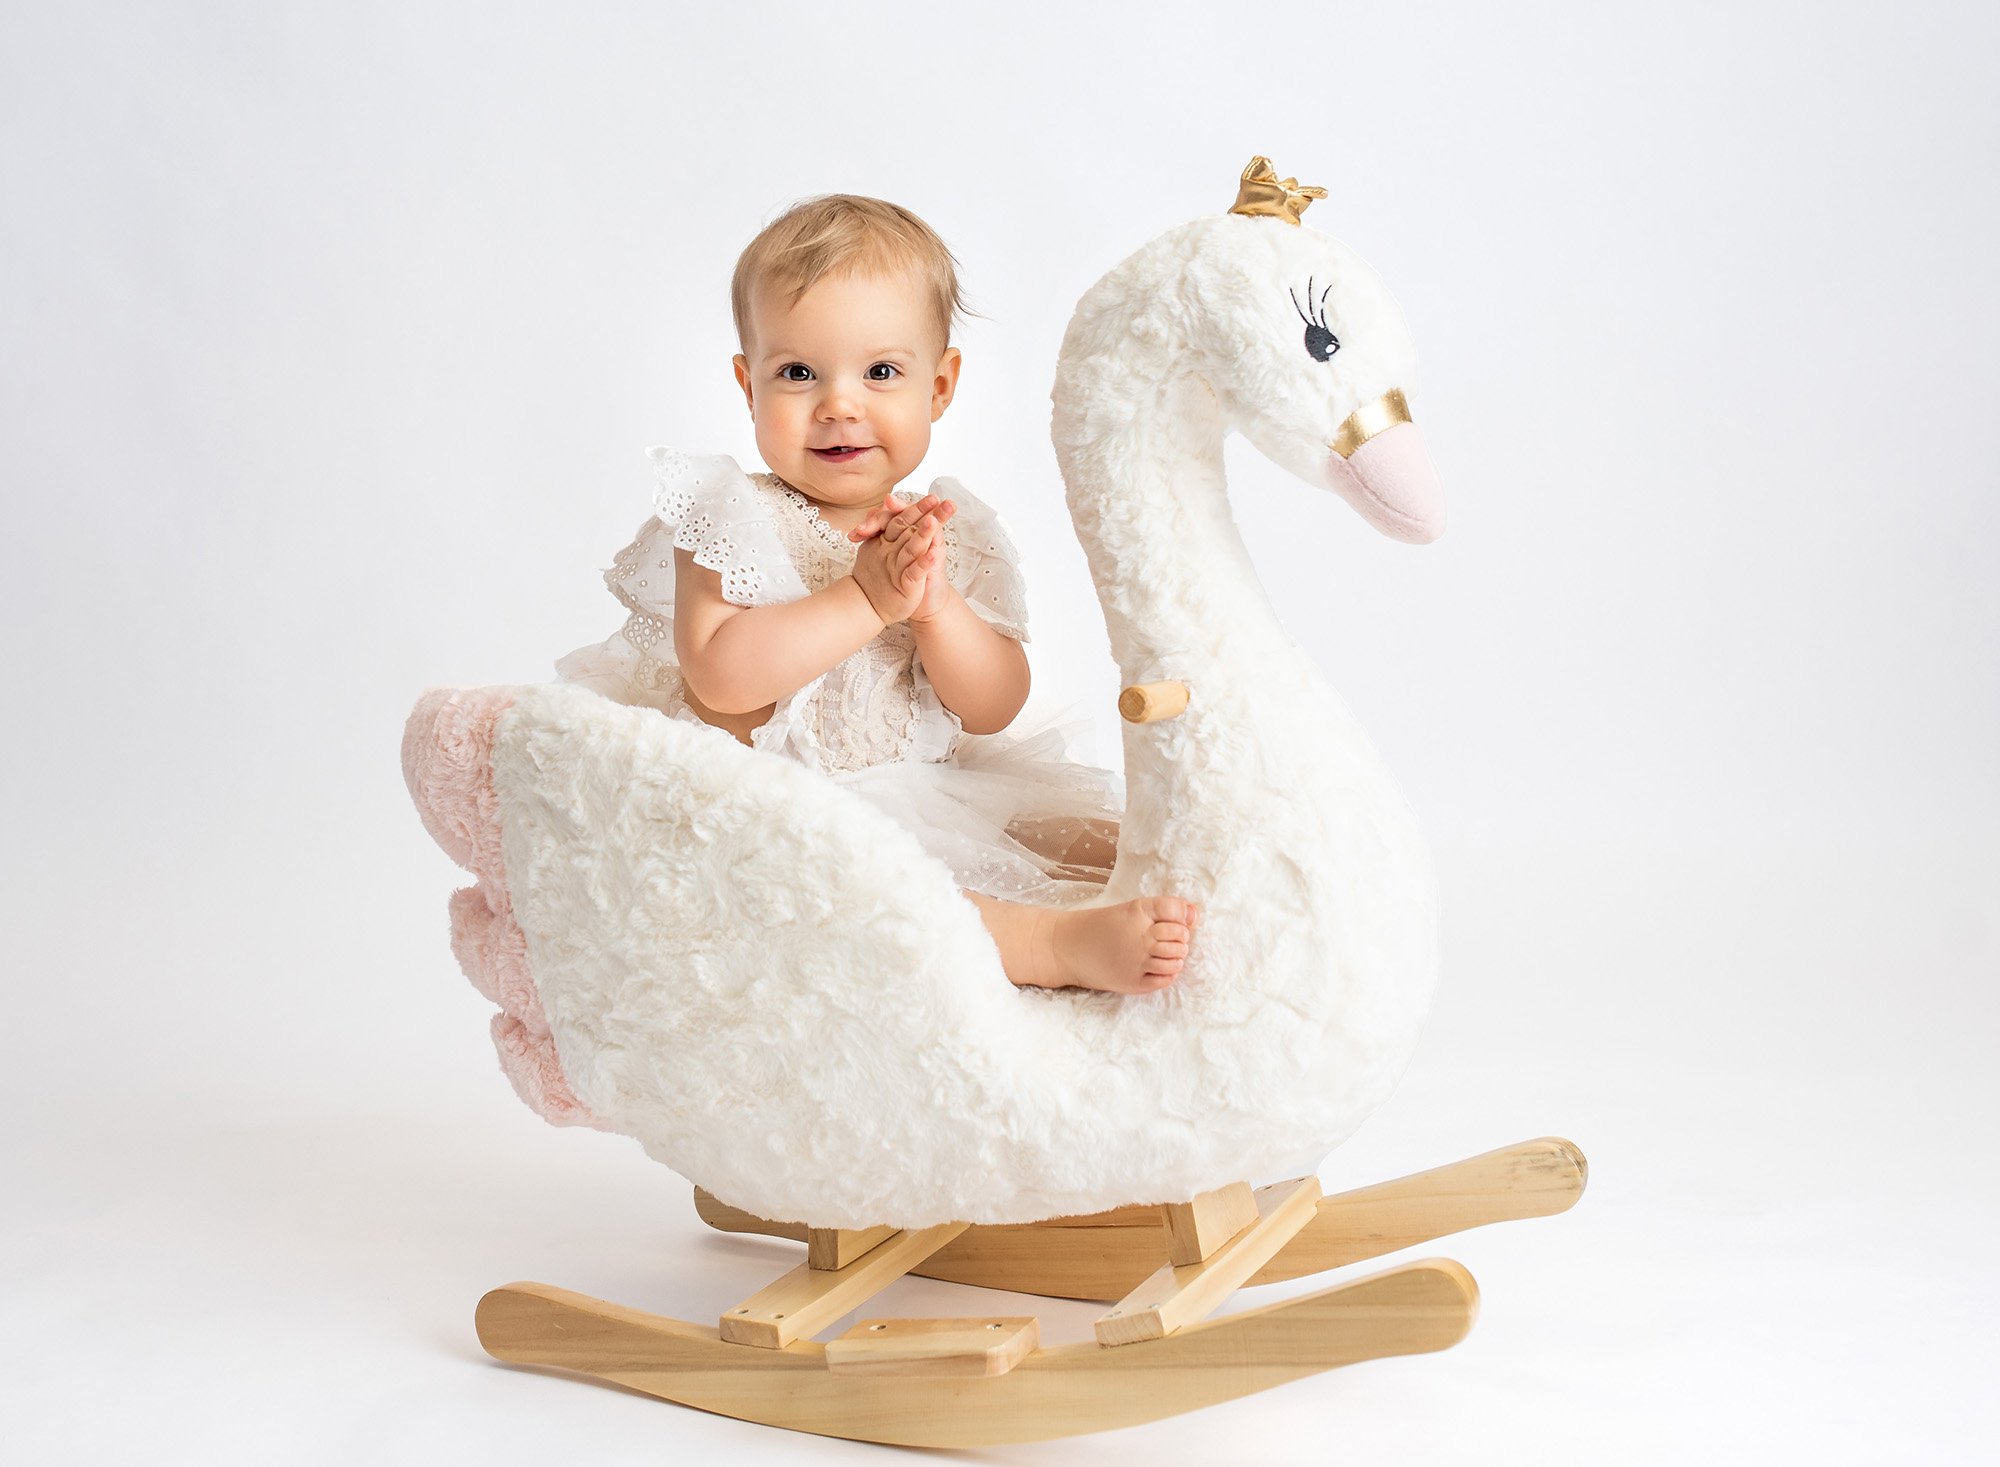 1 year baby photoshoot one year old girl wearing white lace dress sitting on swan rocker with white backdrop